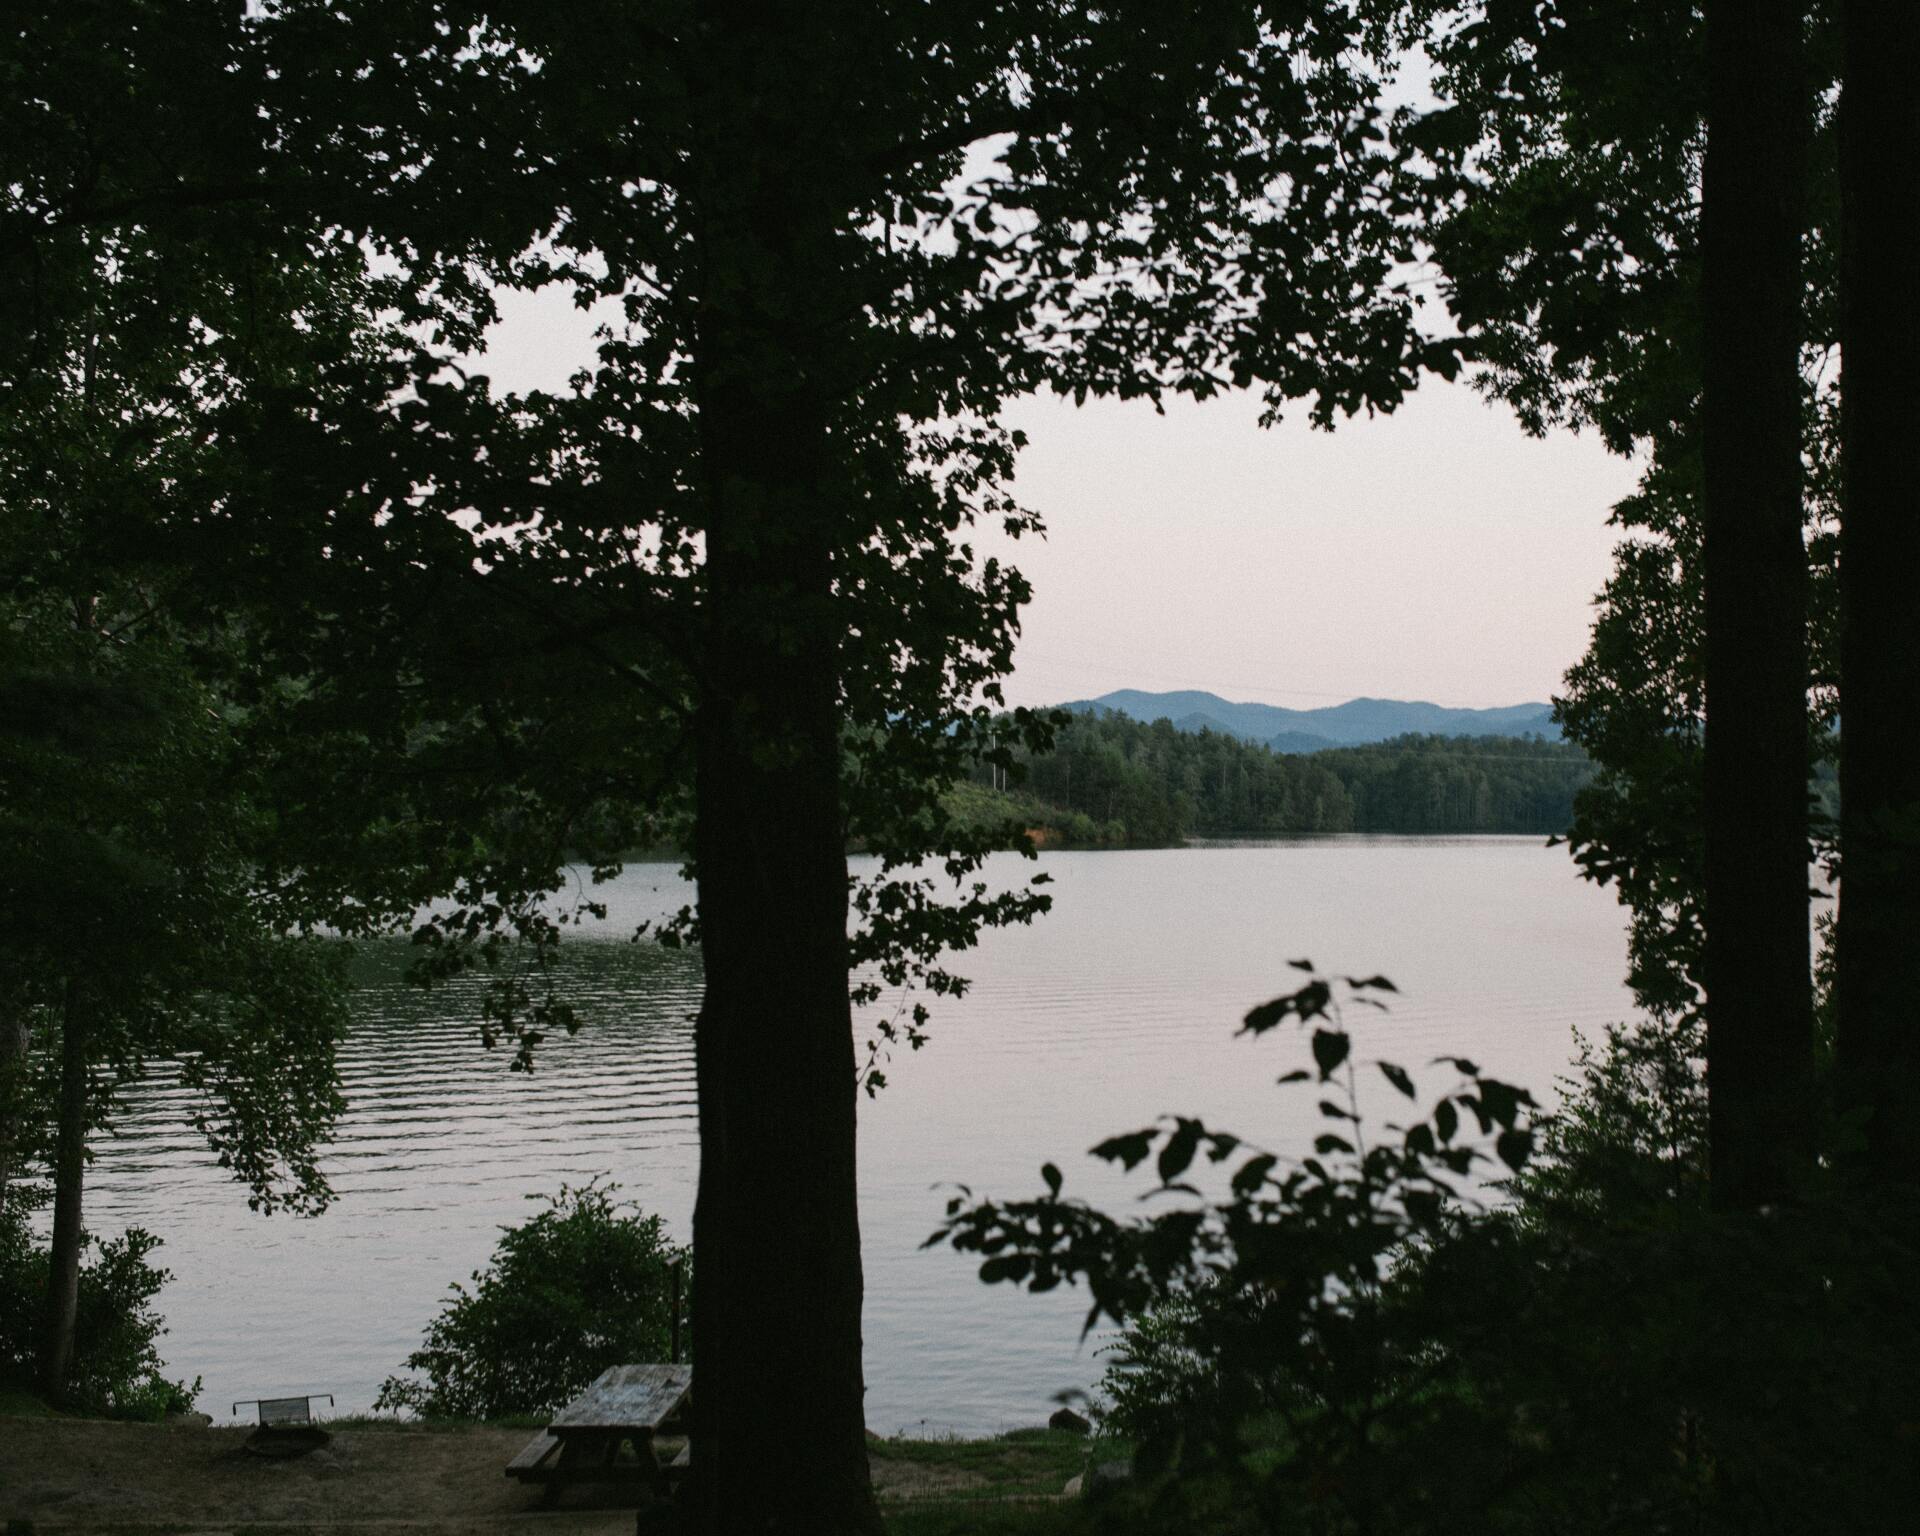 A lake surrounded by trees with a picnic table in the foreground